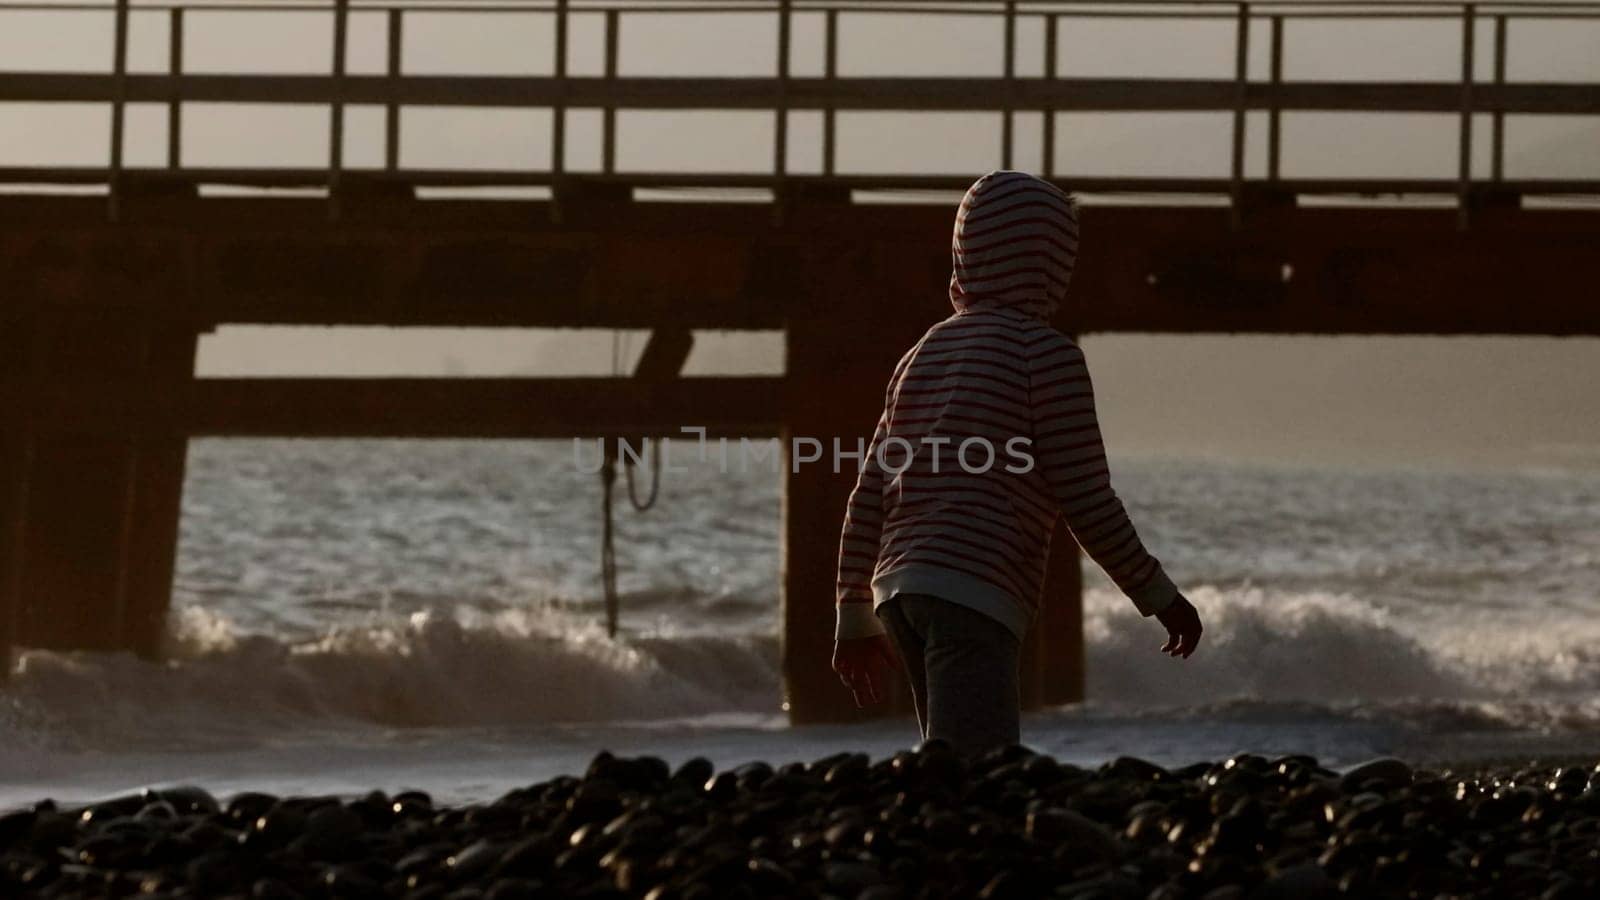 Children walking along the seashore. Creative.Little boys running along the stone beach from the waves next to buoys and bridges and you can see the sunny sky. by Mediawhalestock